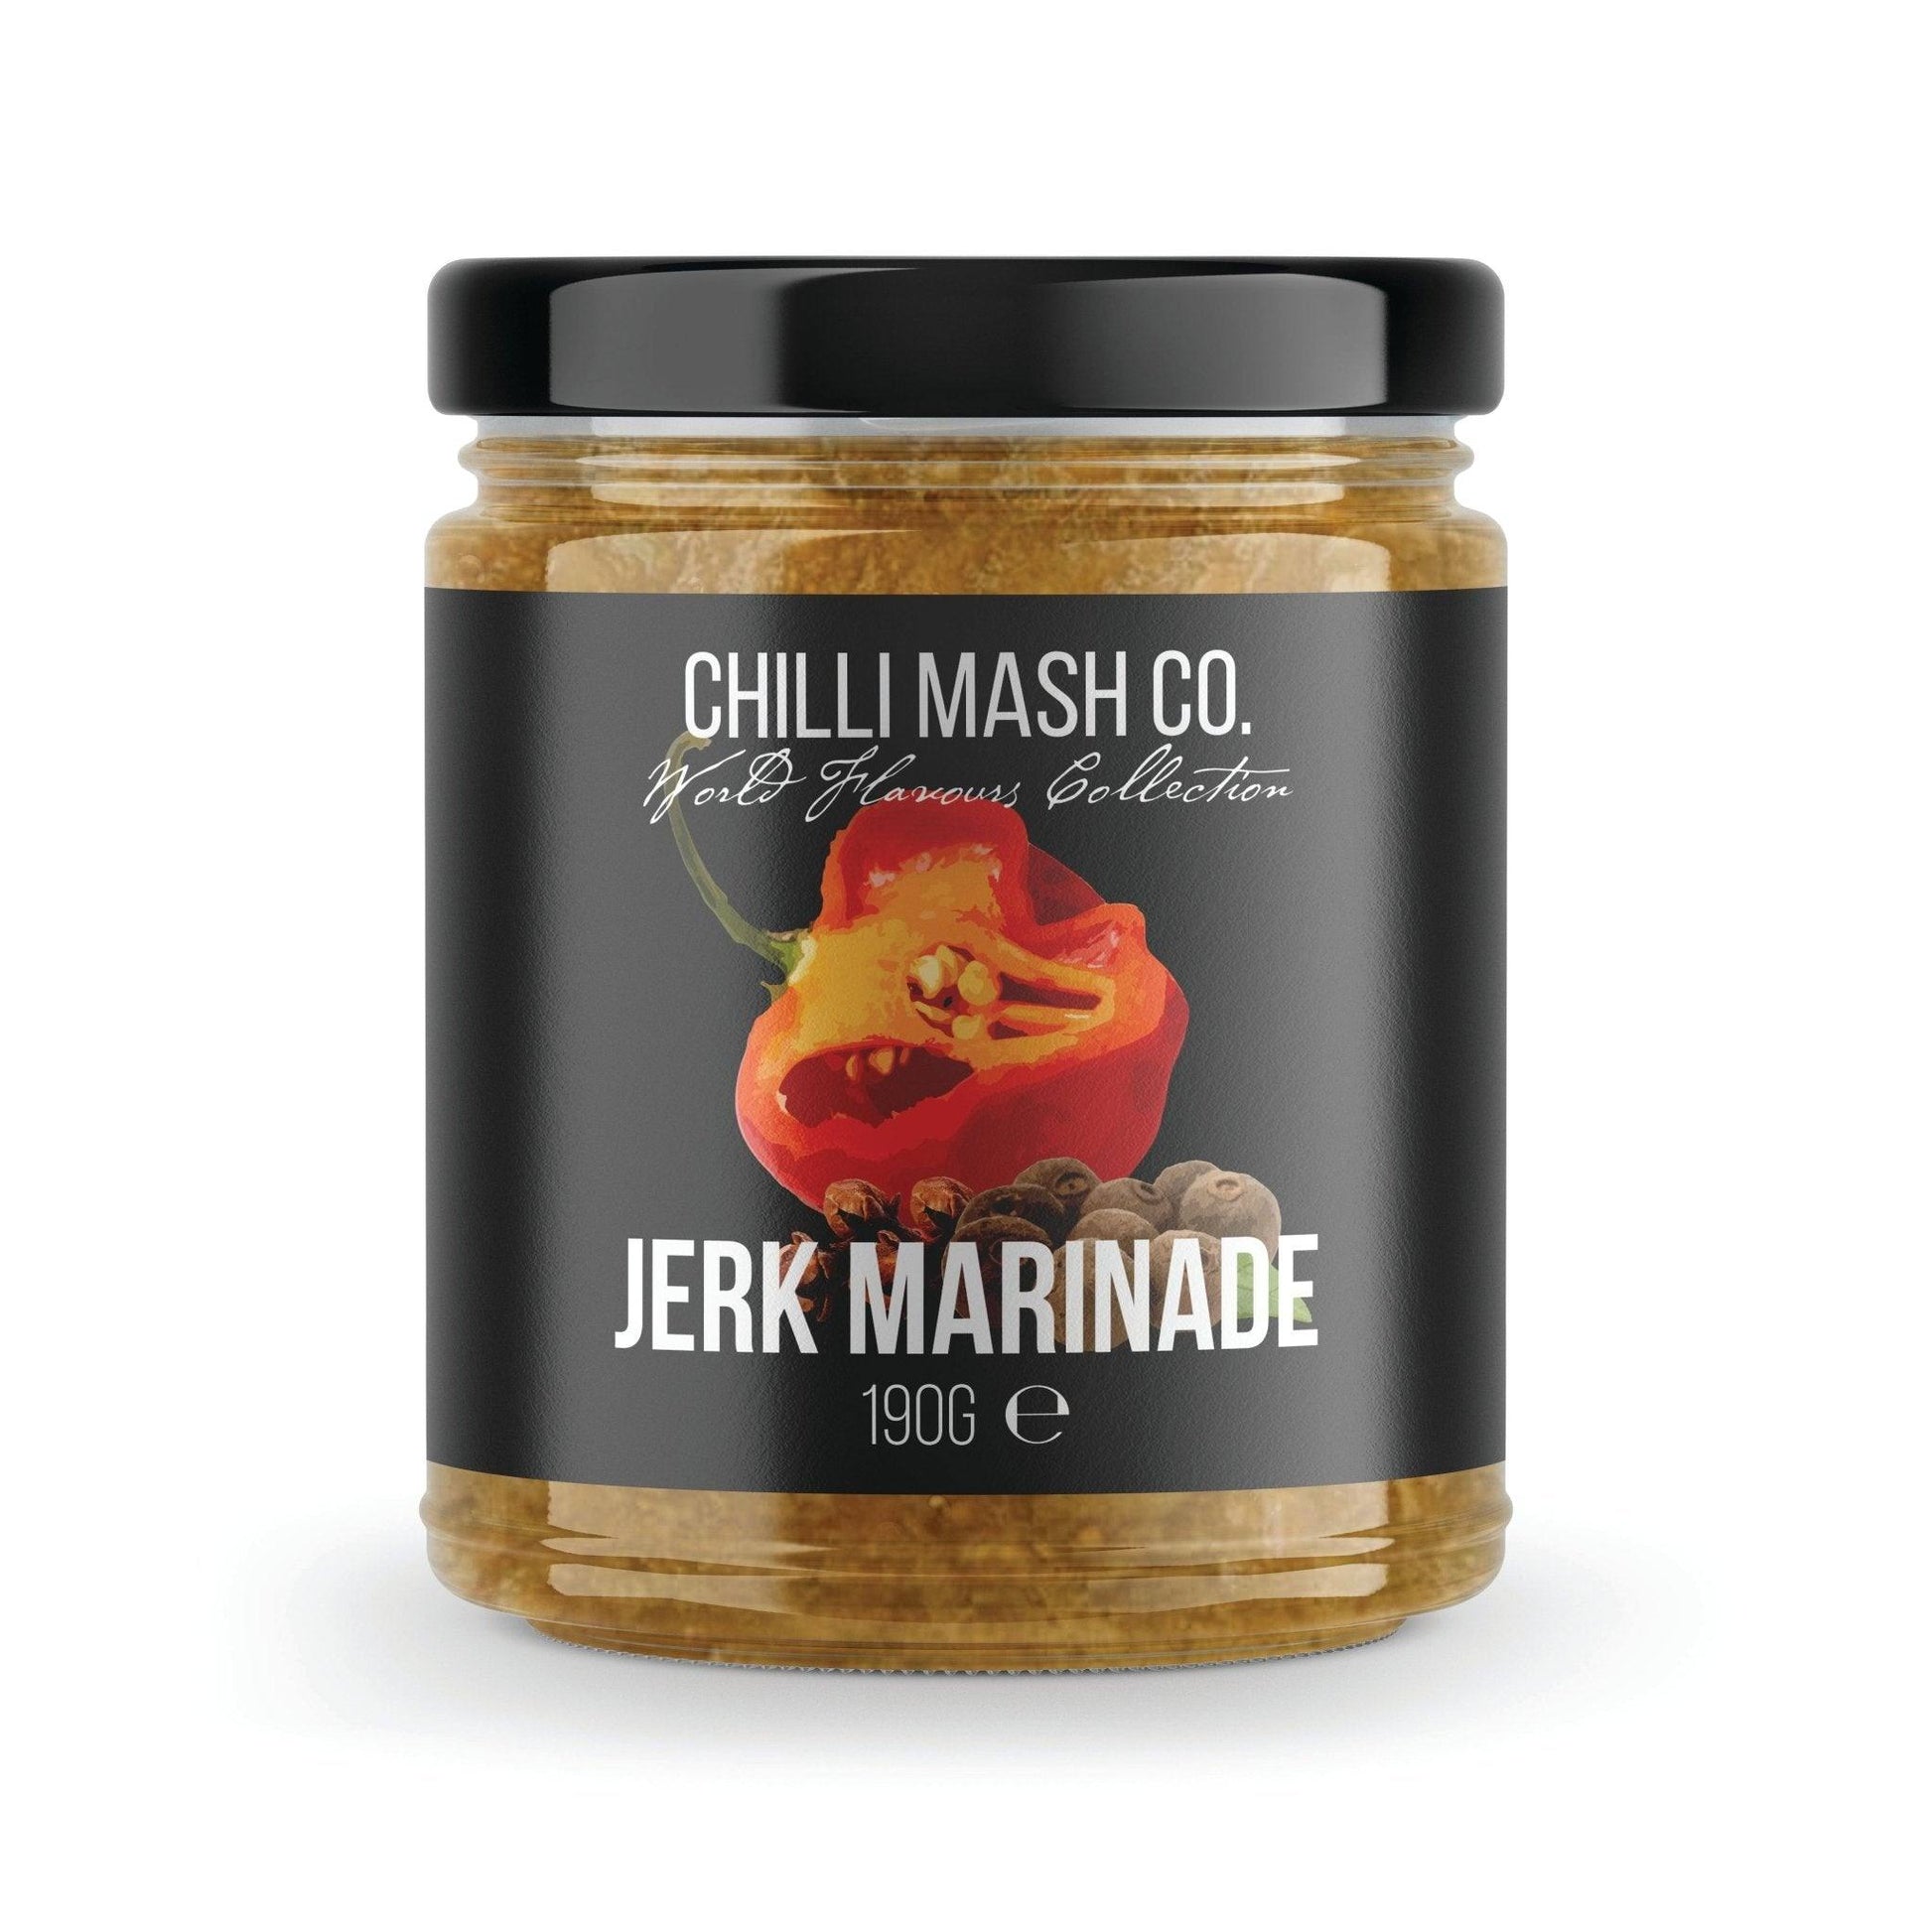 Jerk Marinade | 190g | Chilli Mash Co. | World Flavours Collection - One Stop Chilli Shop